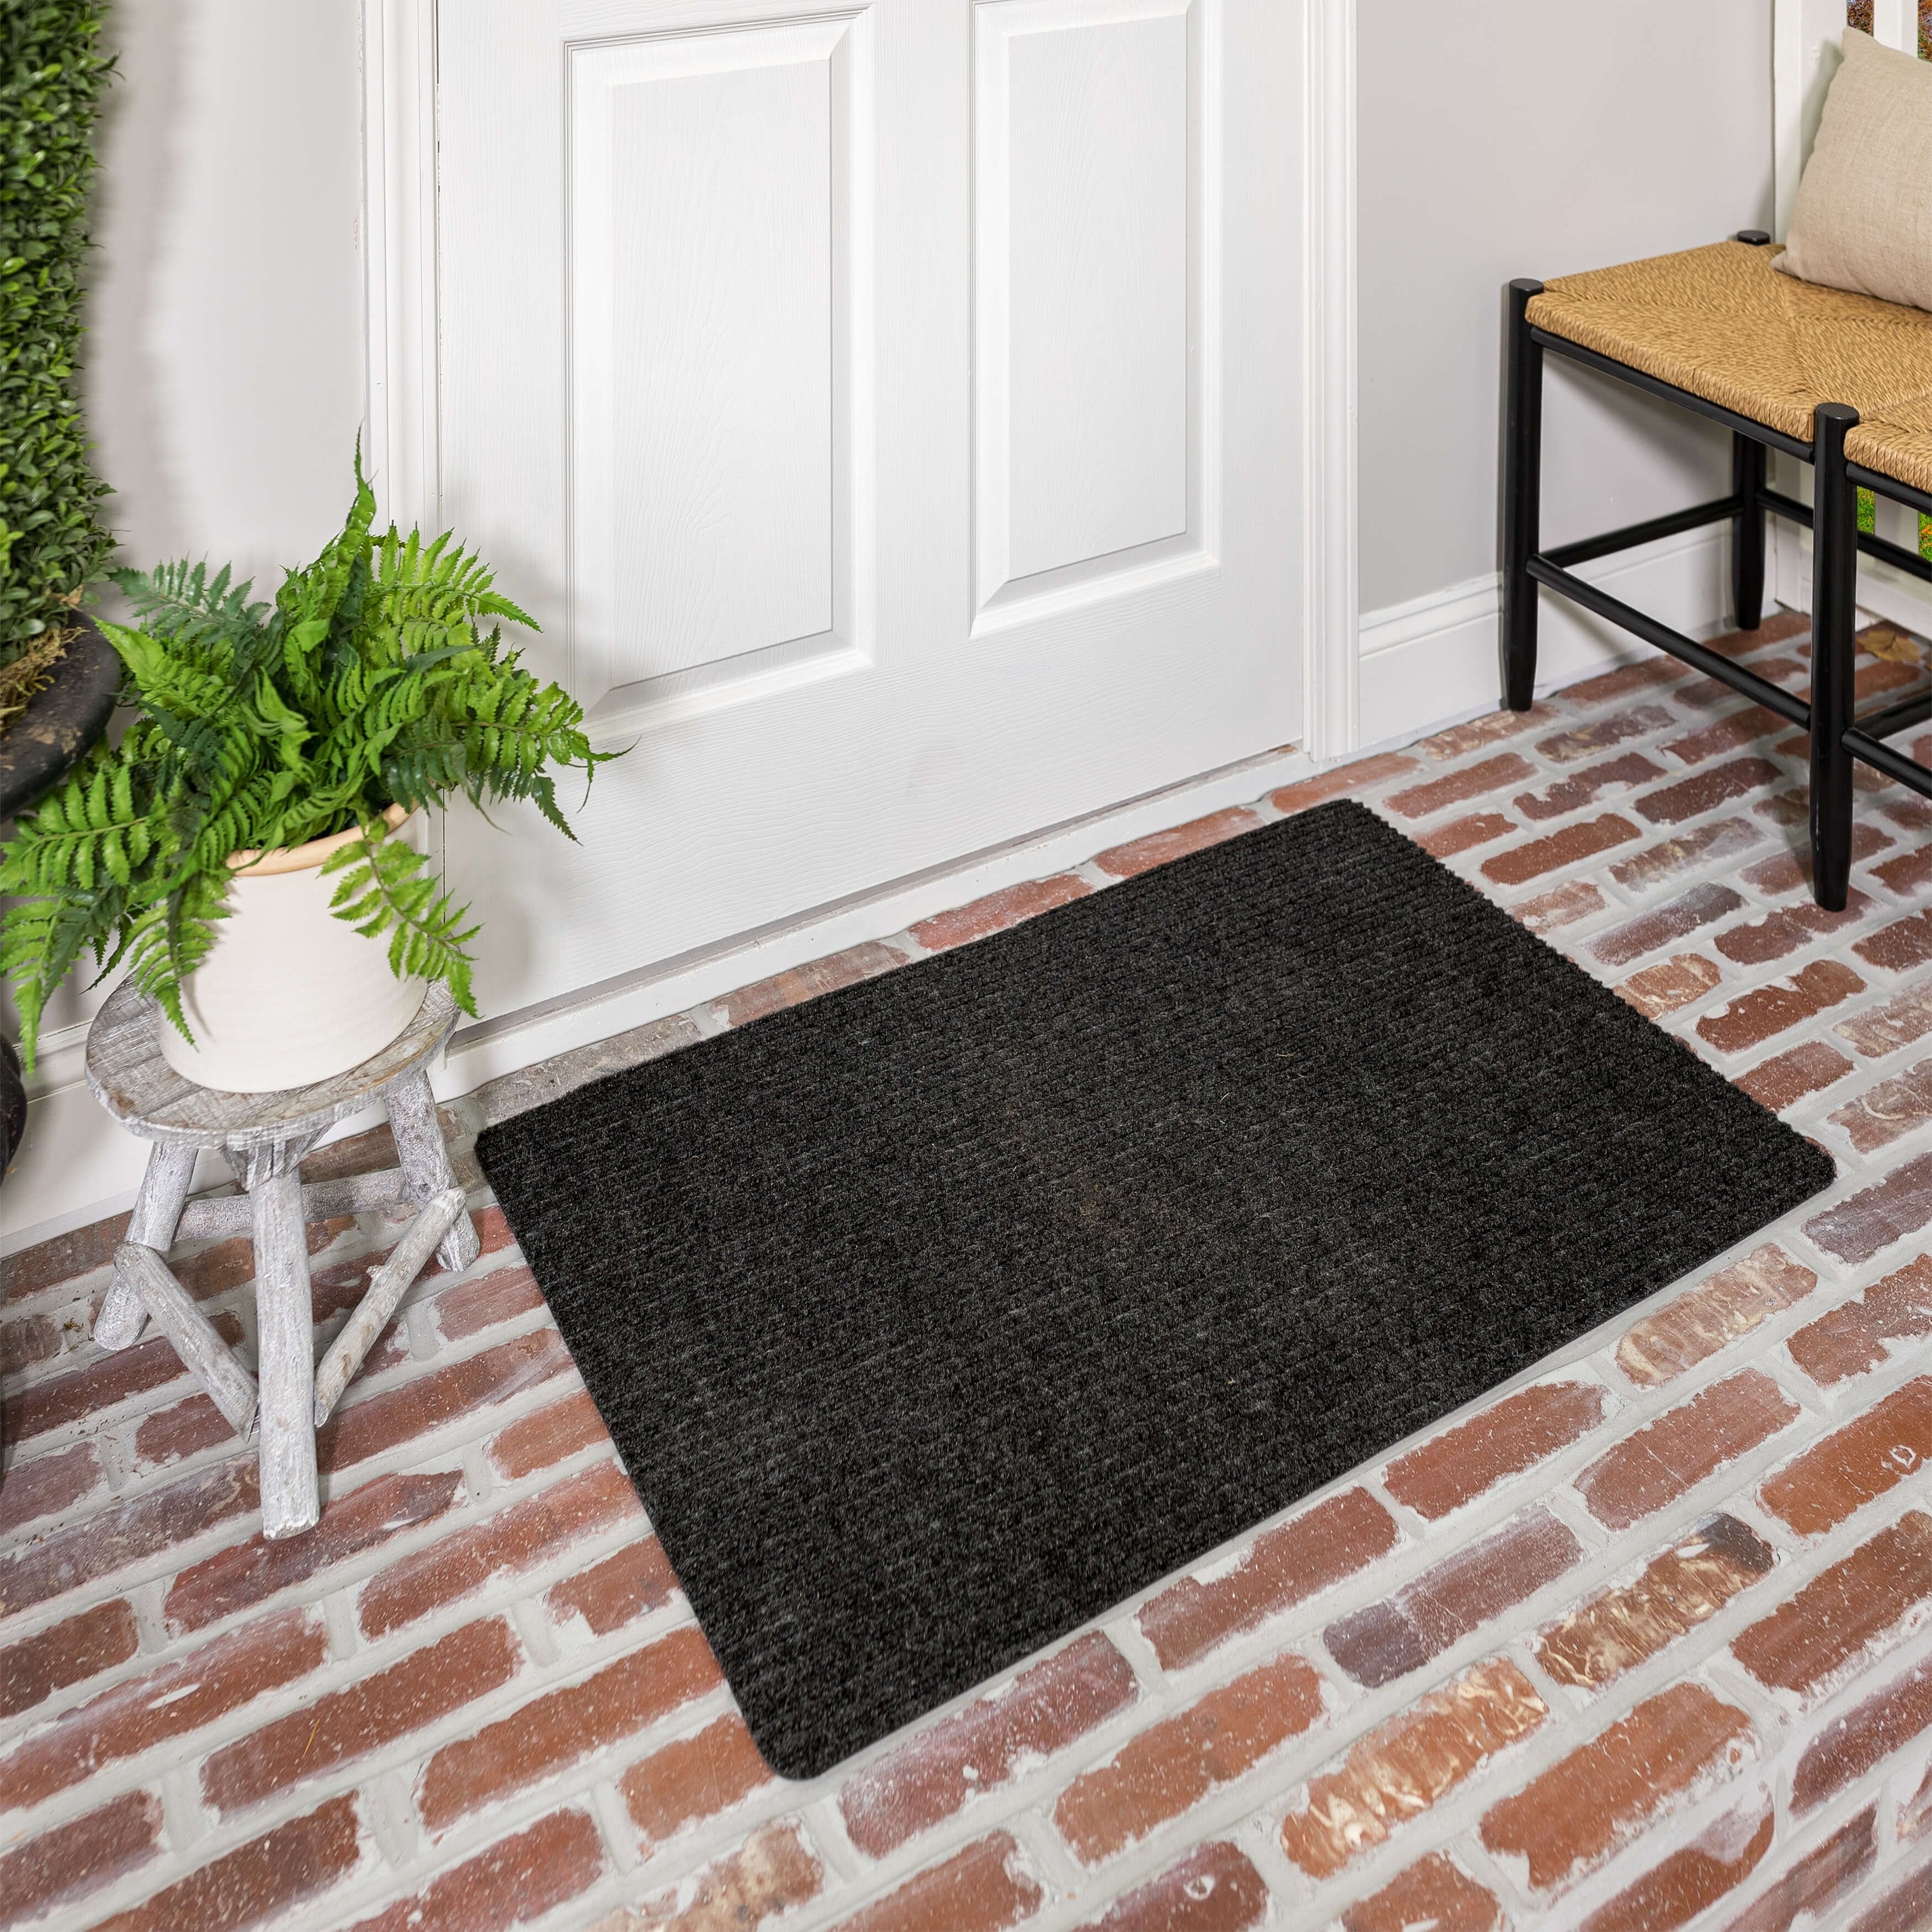 https://ak1.ostkcdn.com/images/products/is/images/direct/38254edb80d466606141732fff4f5860df8666dc/Mohawk-Home-Utility-Floor-Mat-for-Garage%2C-Entryway%2C-Porch%2C-and-Laundry-Room.jpg